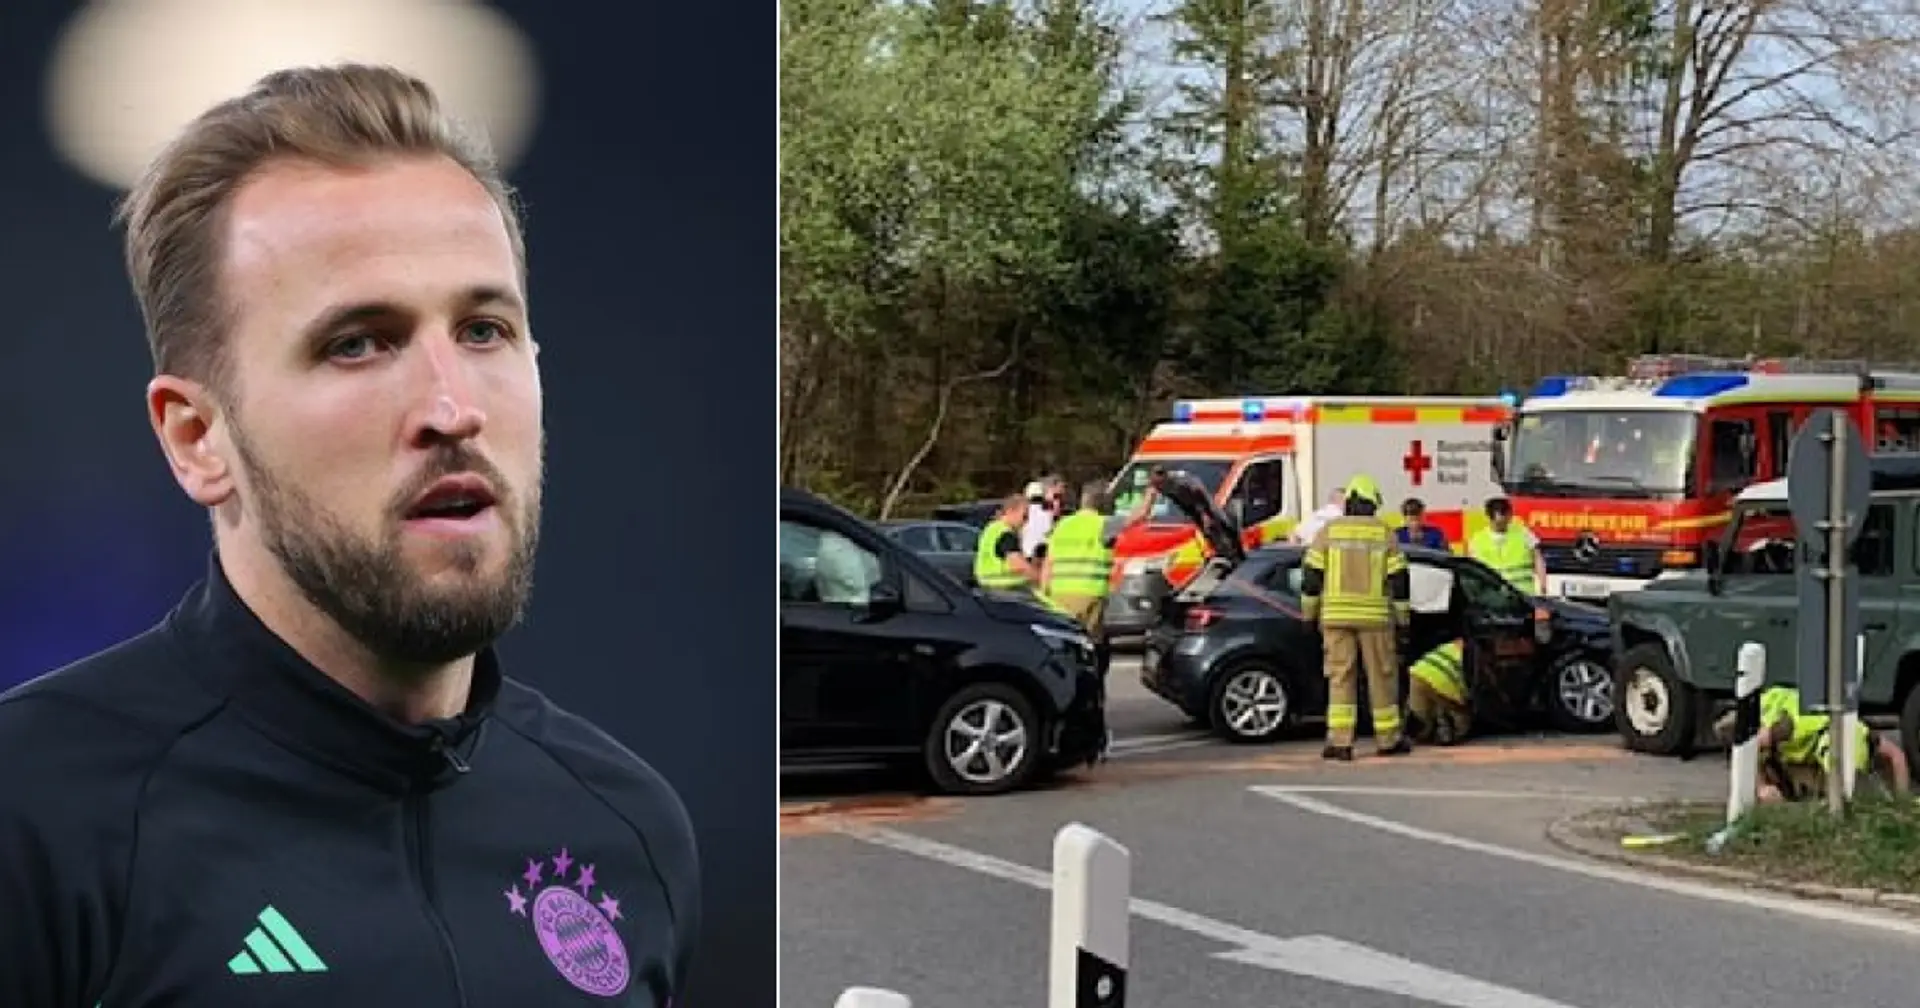 Harry Kane's 3 kids taken to hospital with minor injuries after car crash in Munich